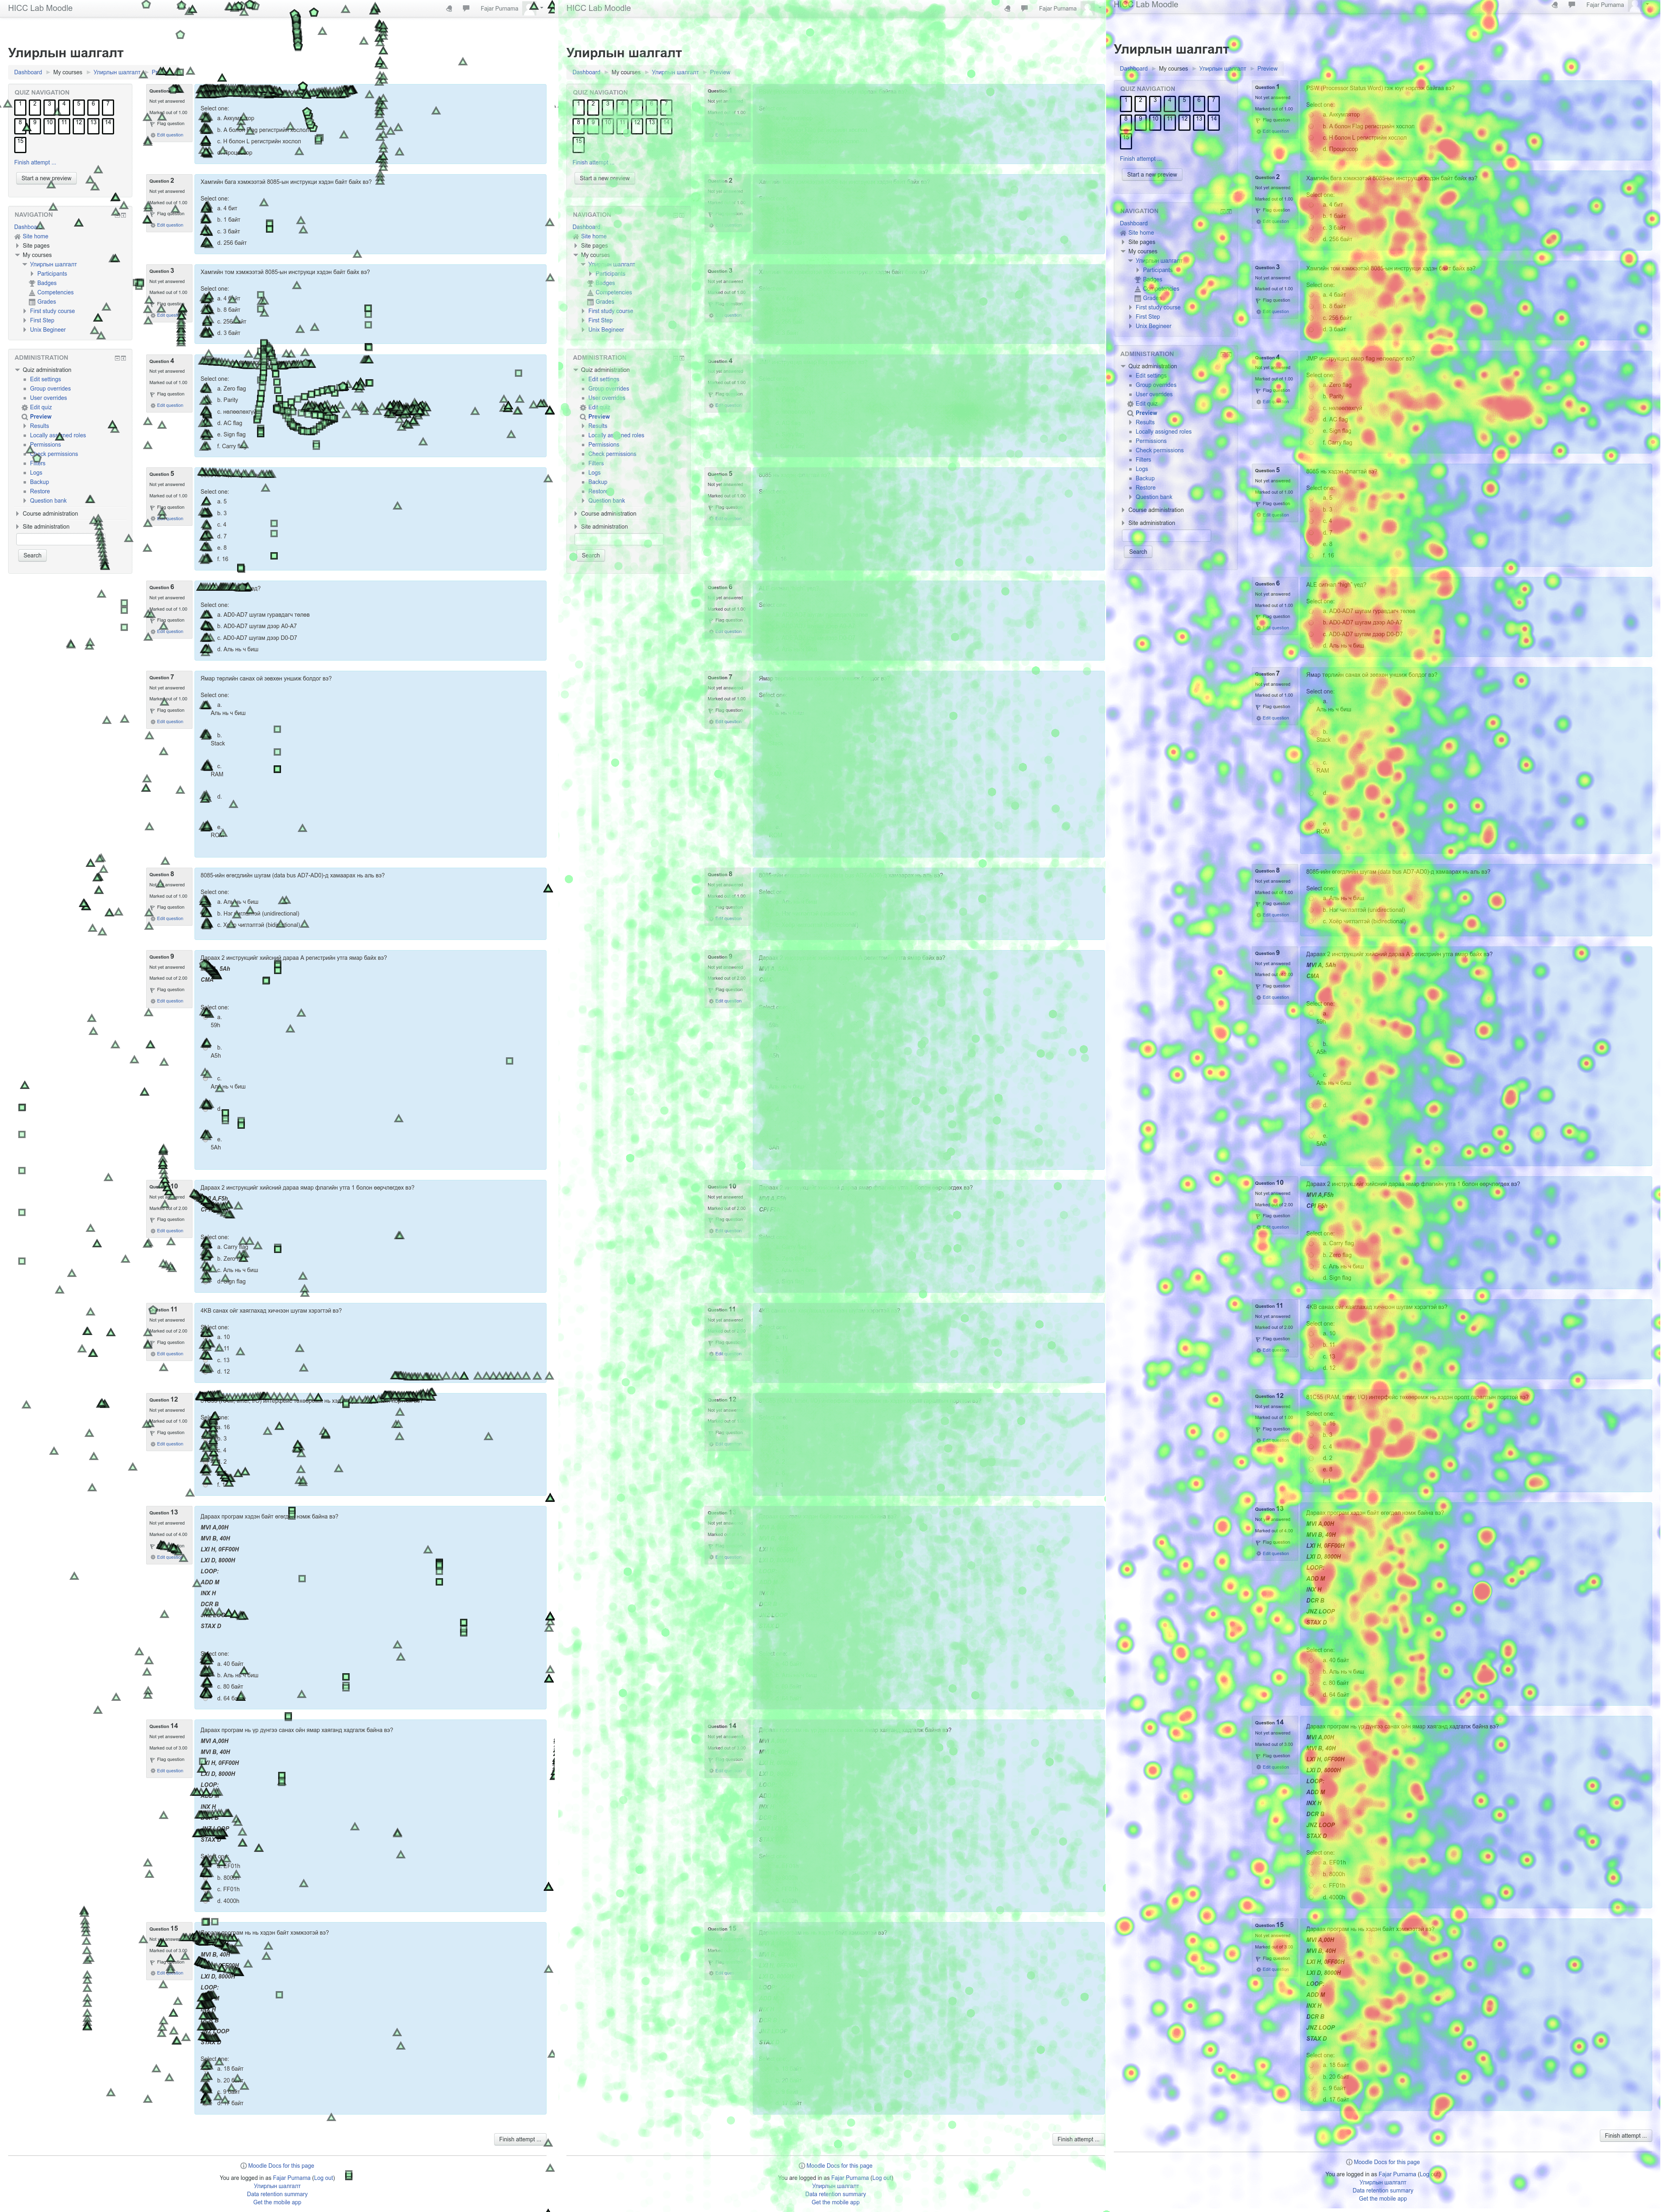 combine-mouse-tracking-visualization-preprint-min.png